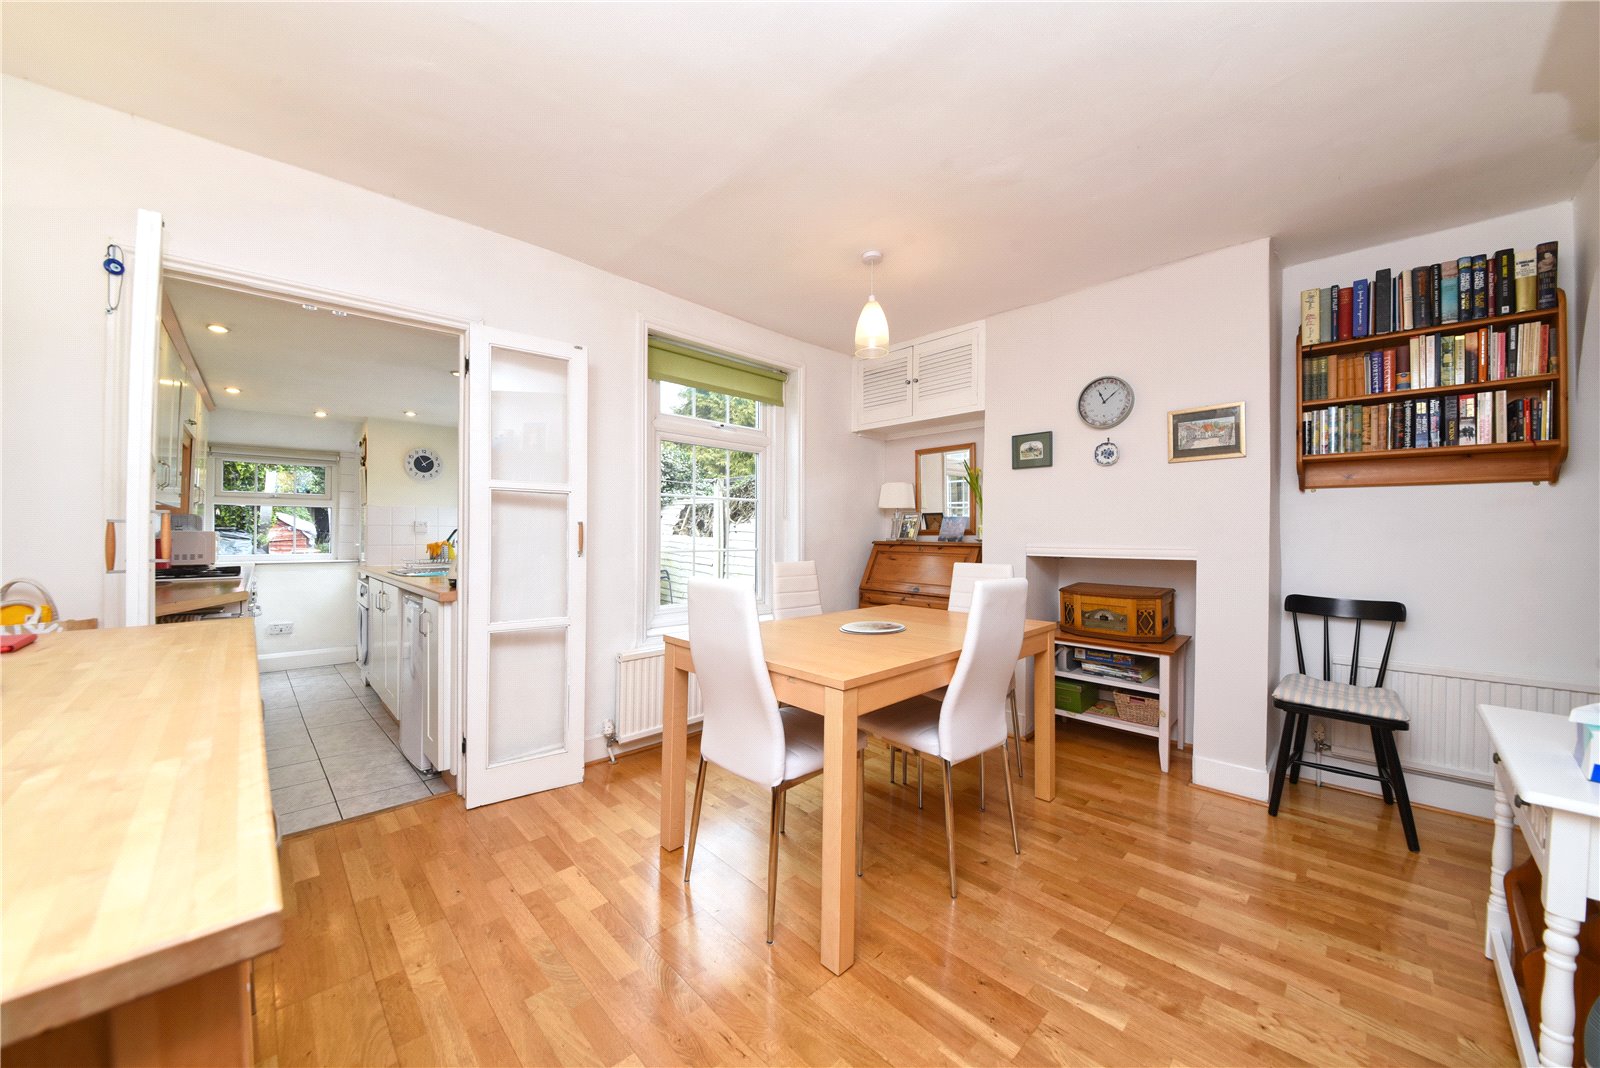 2 bed house for sale in Finchley Park, Finchley - Property Image 1